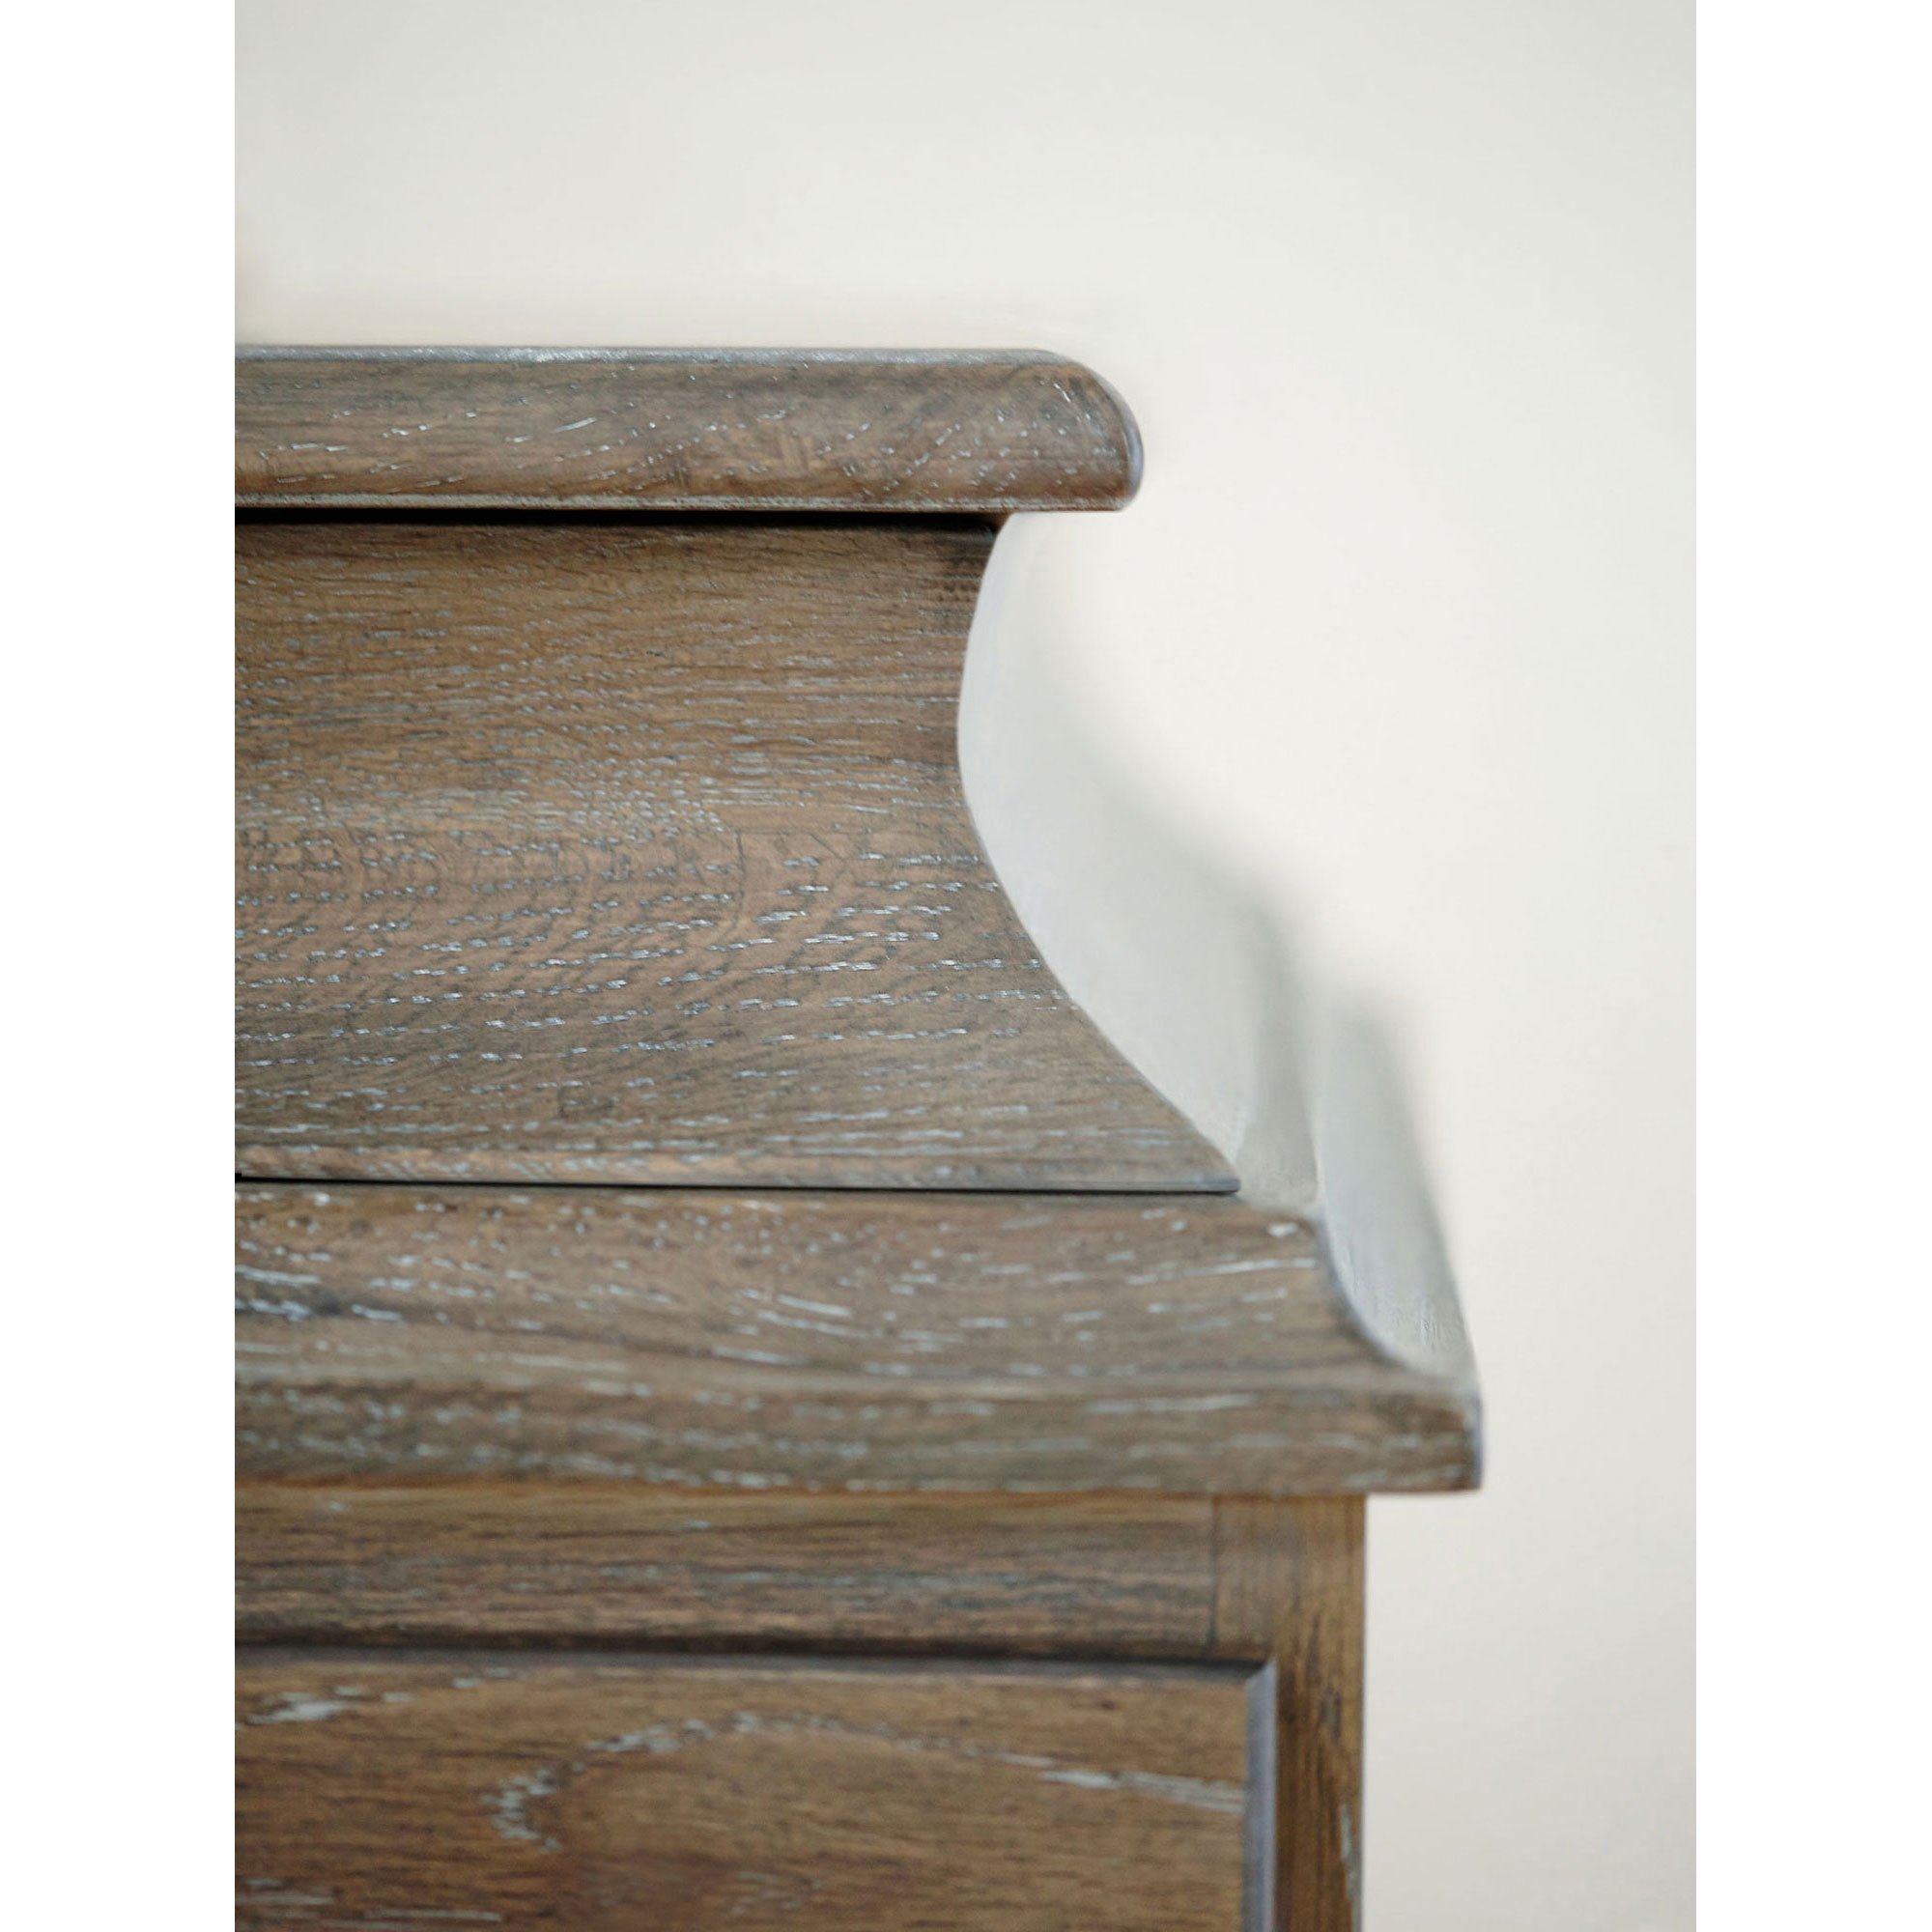 Marietta French Country Antique Oak Curved Nightstand - Image 1